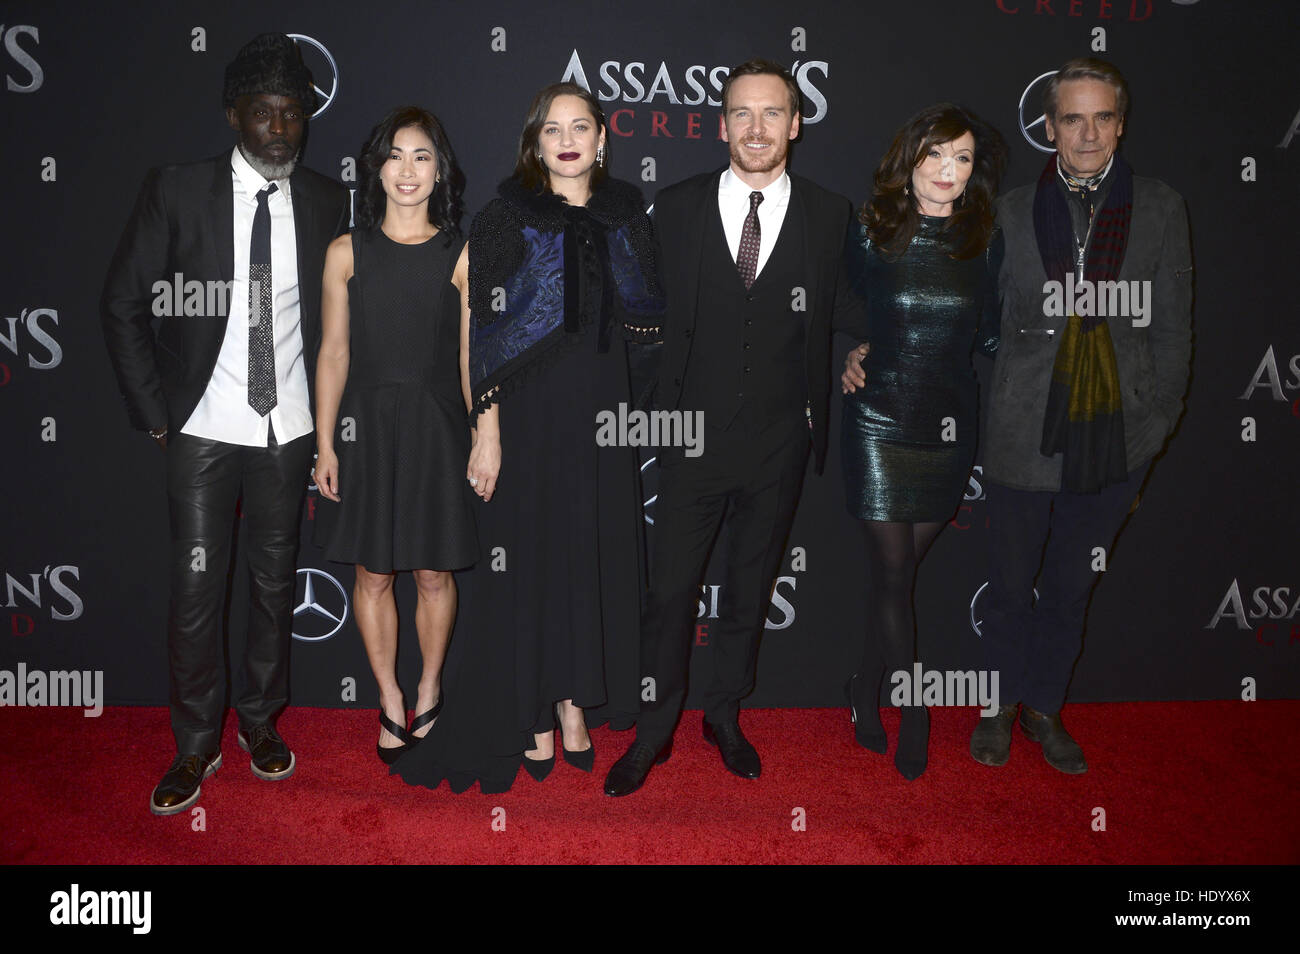 Michael K. Williams, Michelle Lin, Marion Cotillard, Michael Fassbender, Essie Davis and Jeremy Irons attend the 'Assassin's Creed' special screening at AMC Empire on December 13, 2016 in New York. | Verwendung weltweit/picture alliance Stock Photo